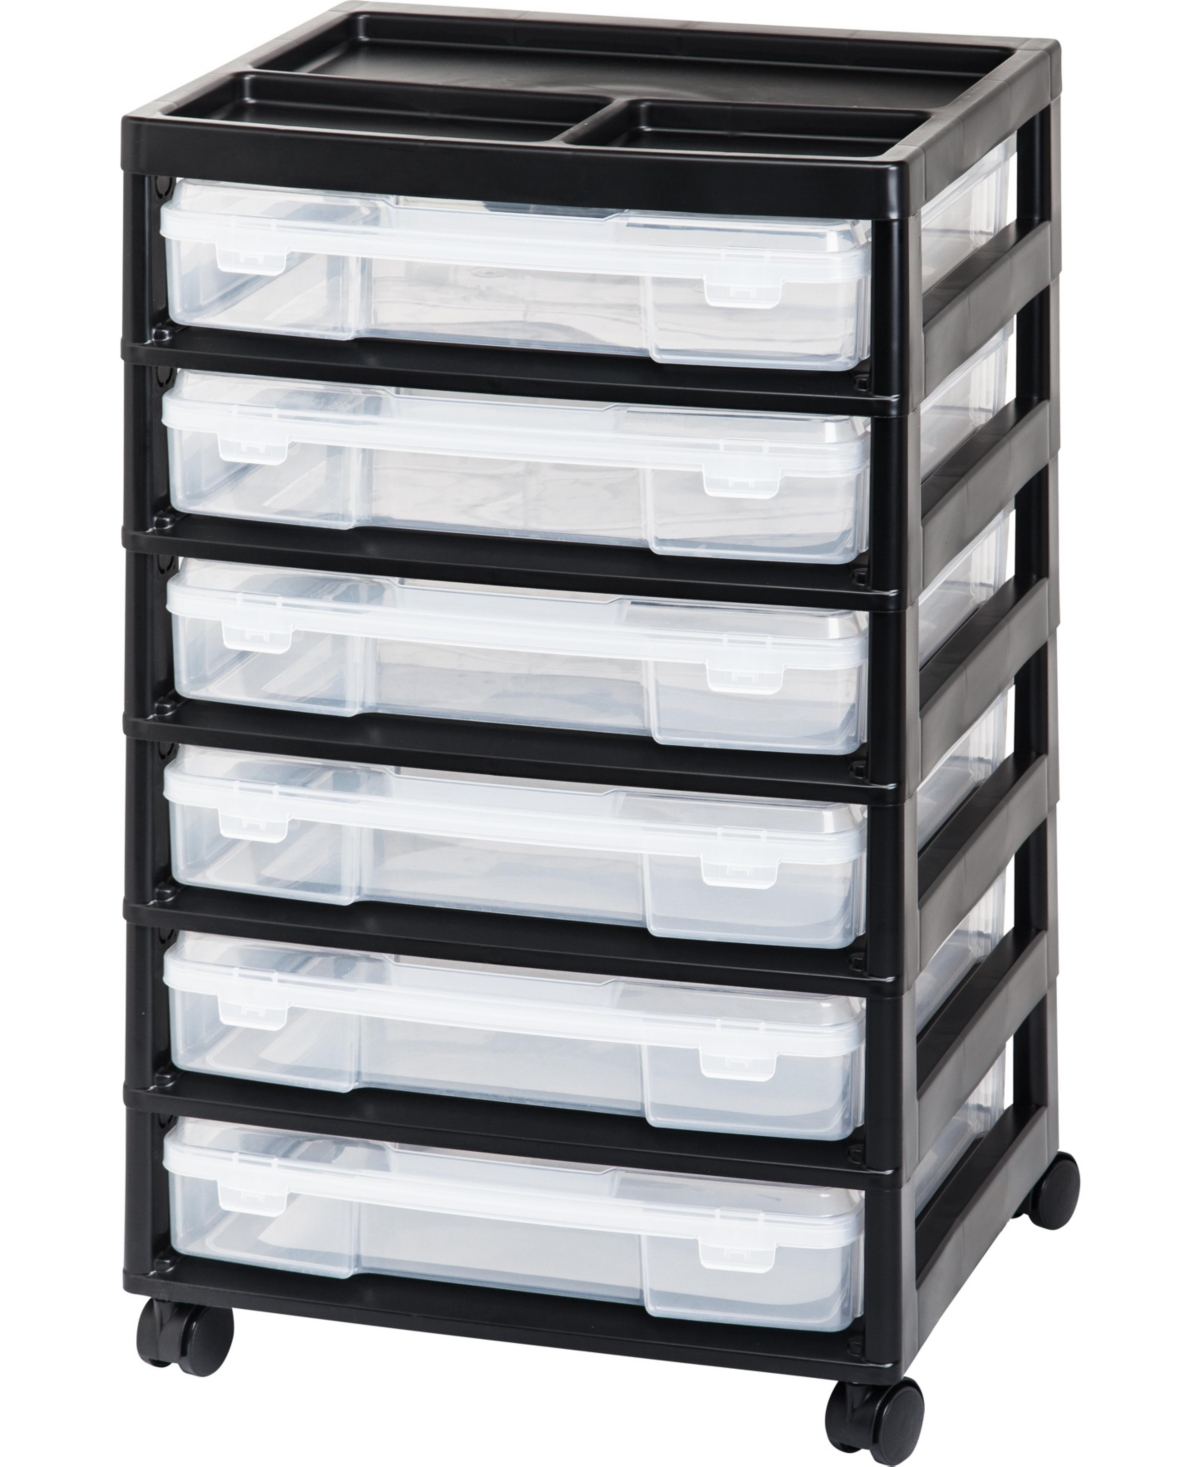 6 Drawers Scrapbook Plastic Storage Cart with Organizer Top with casters, Black - Black